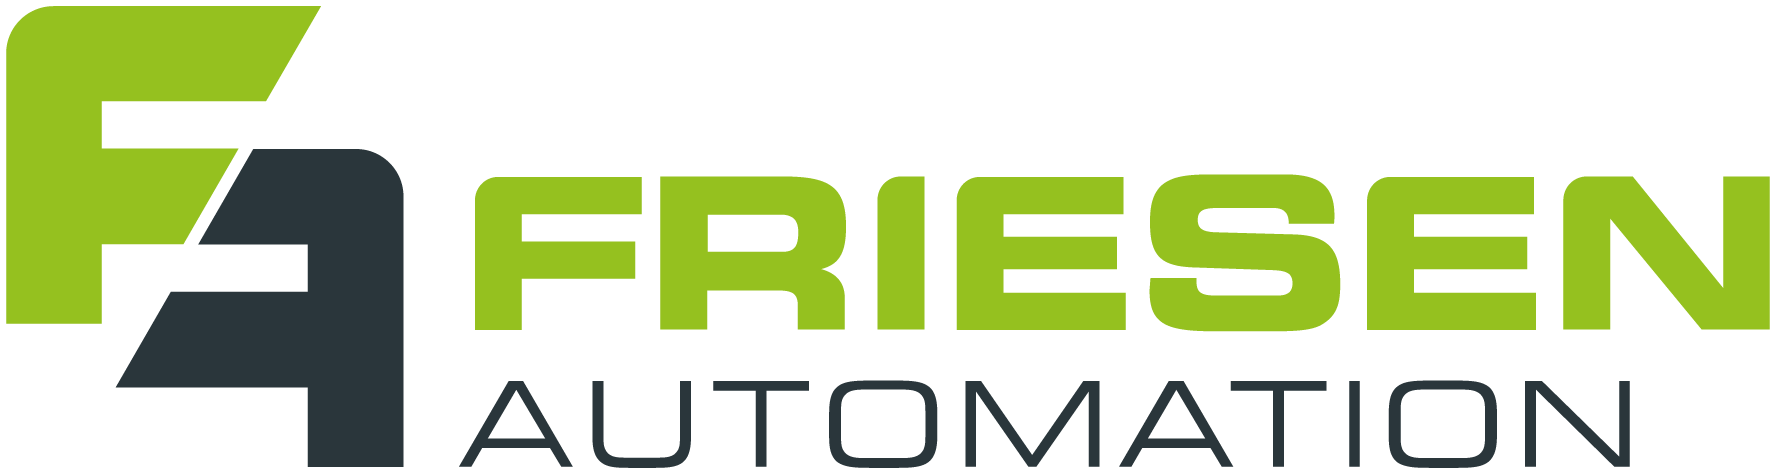 FRIESEN AUTOMATION | … made simple